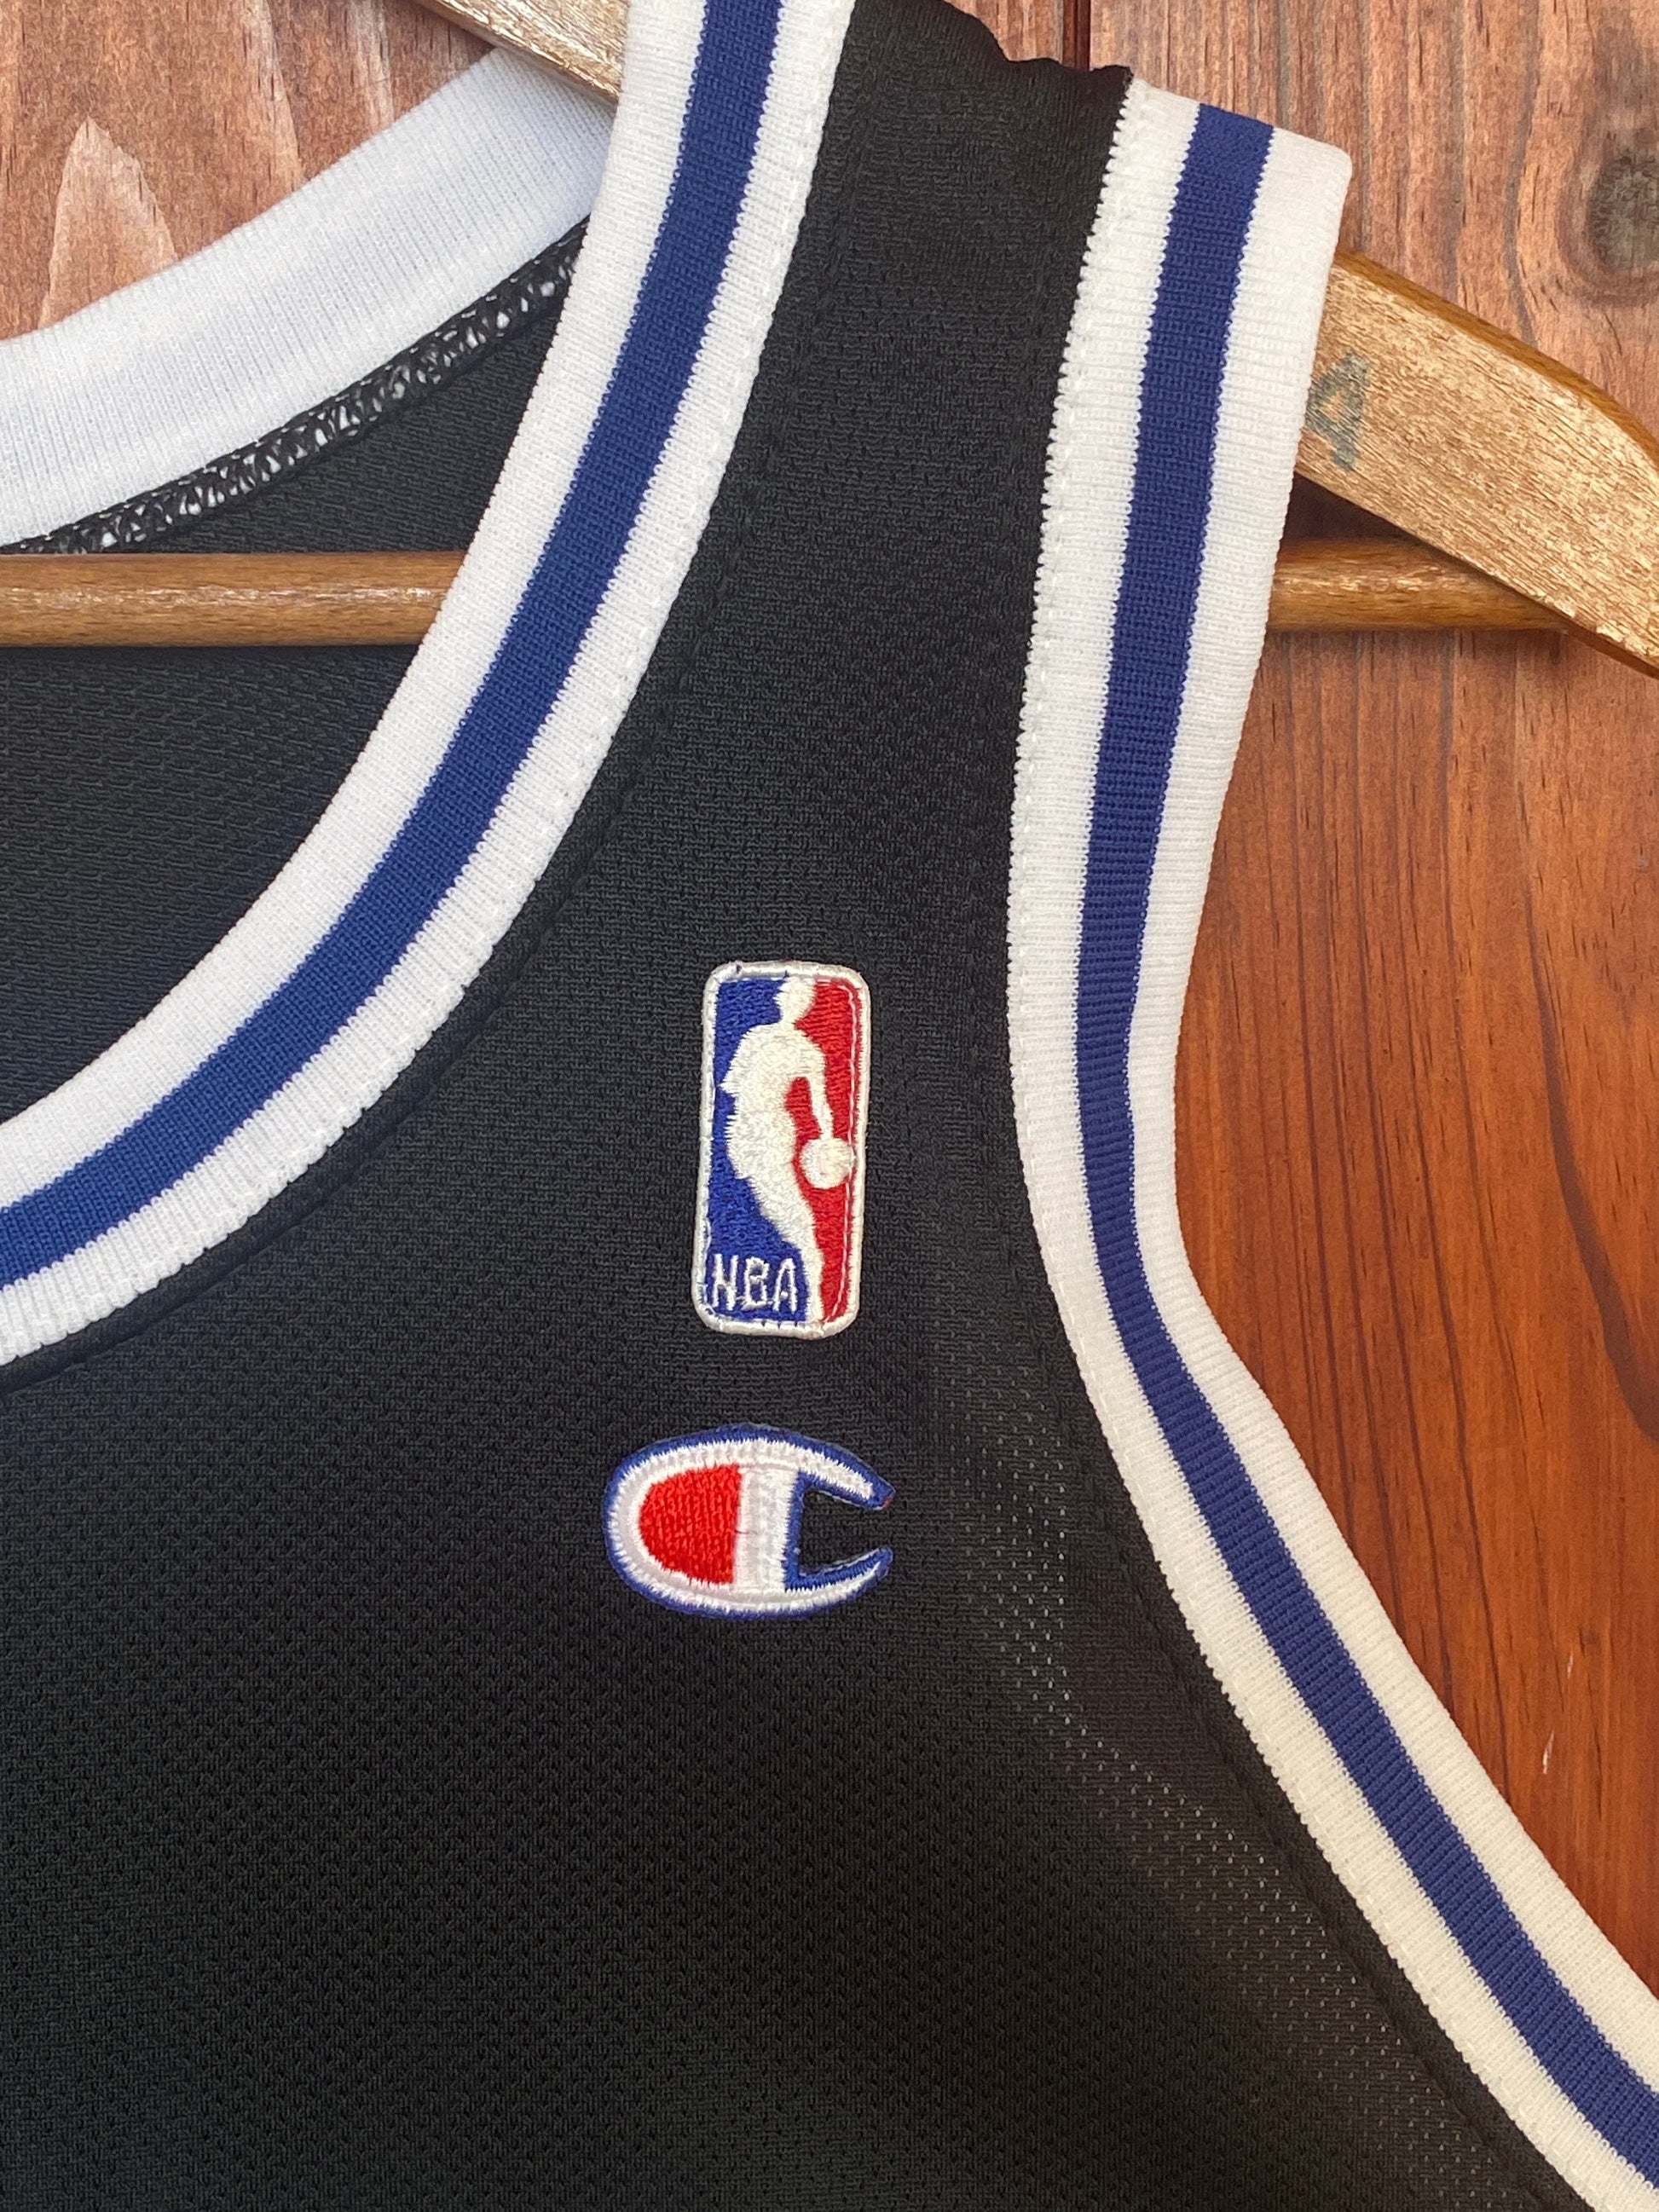 Vintage 90s Orlando Champion NBA jersey with player Hardaway #01, size 48 - BACK view.